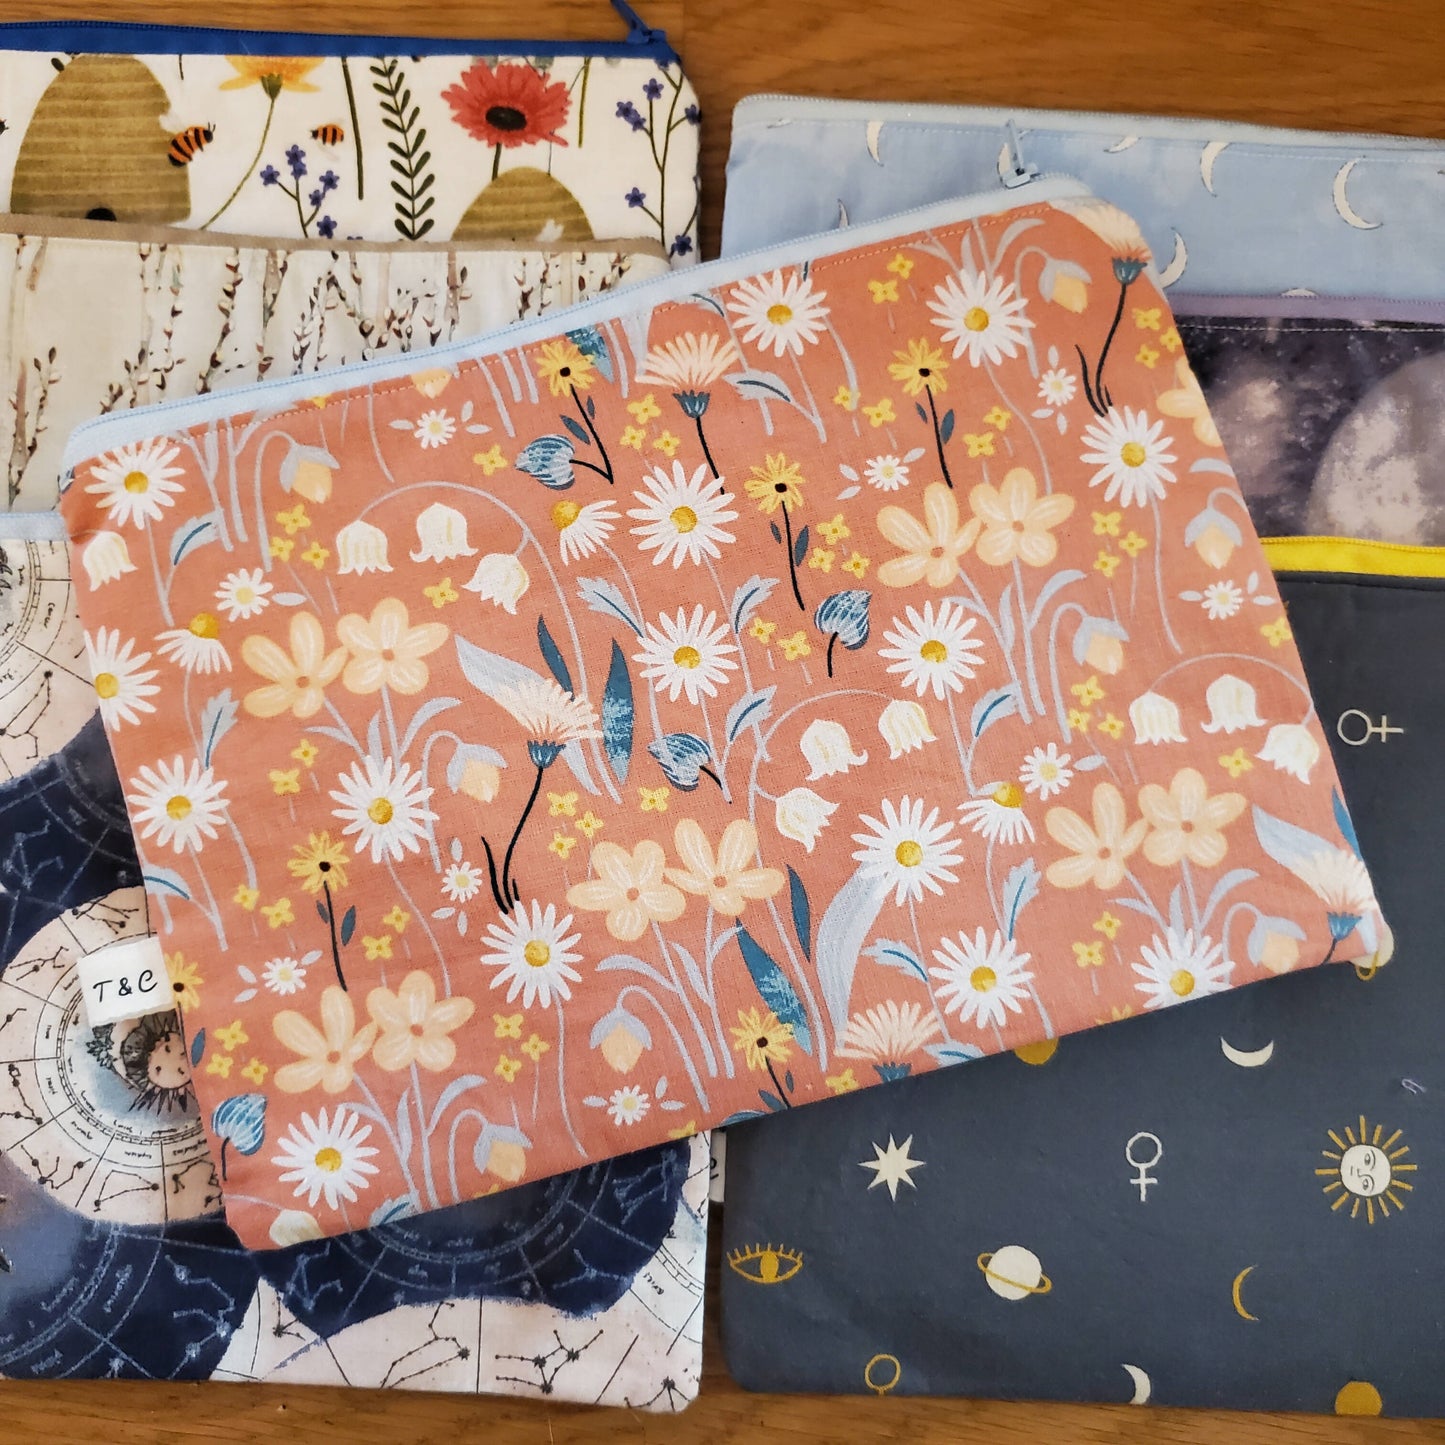 Small Mystic & Floral Bags